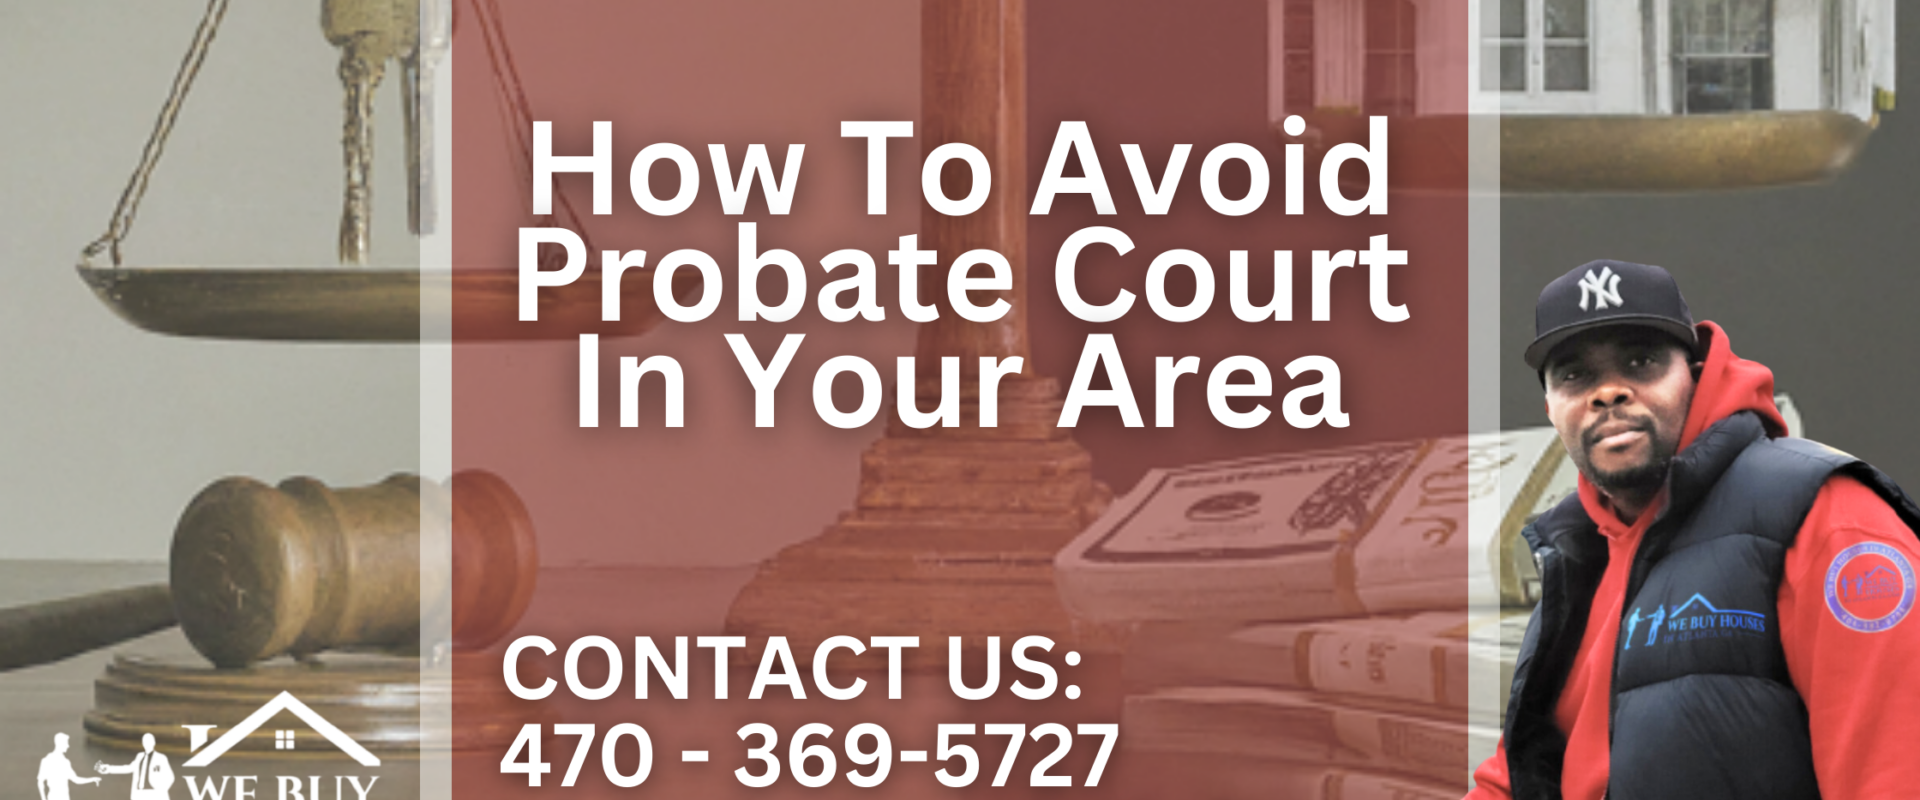 How To Avoid Probate Court In Your Area